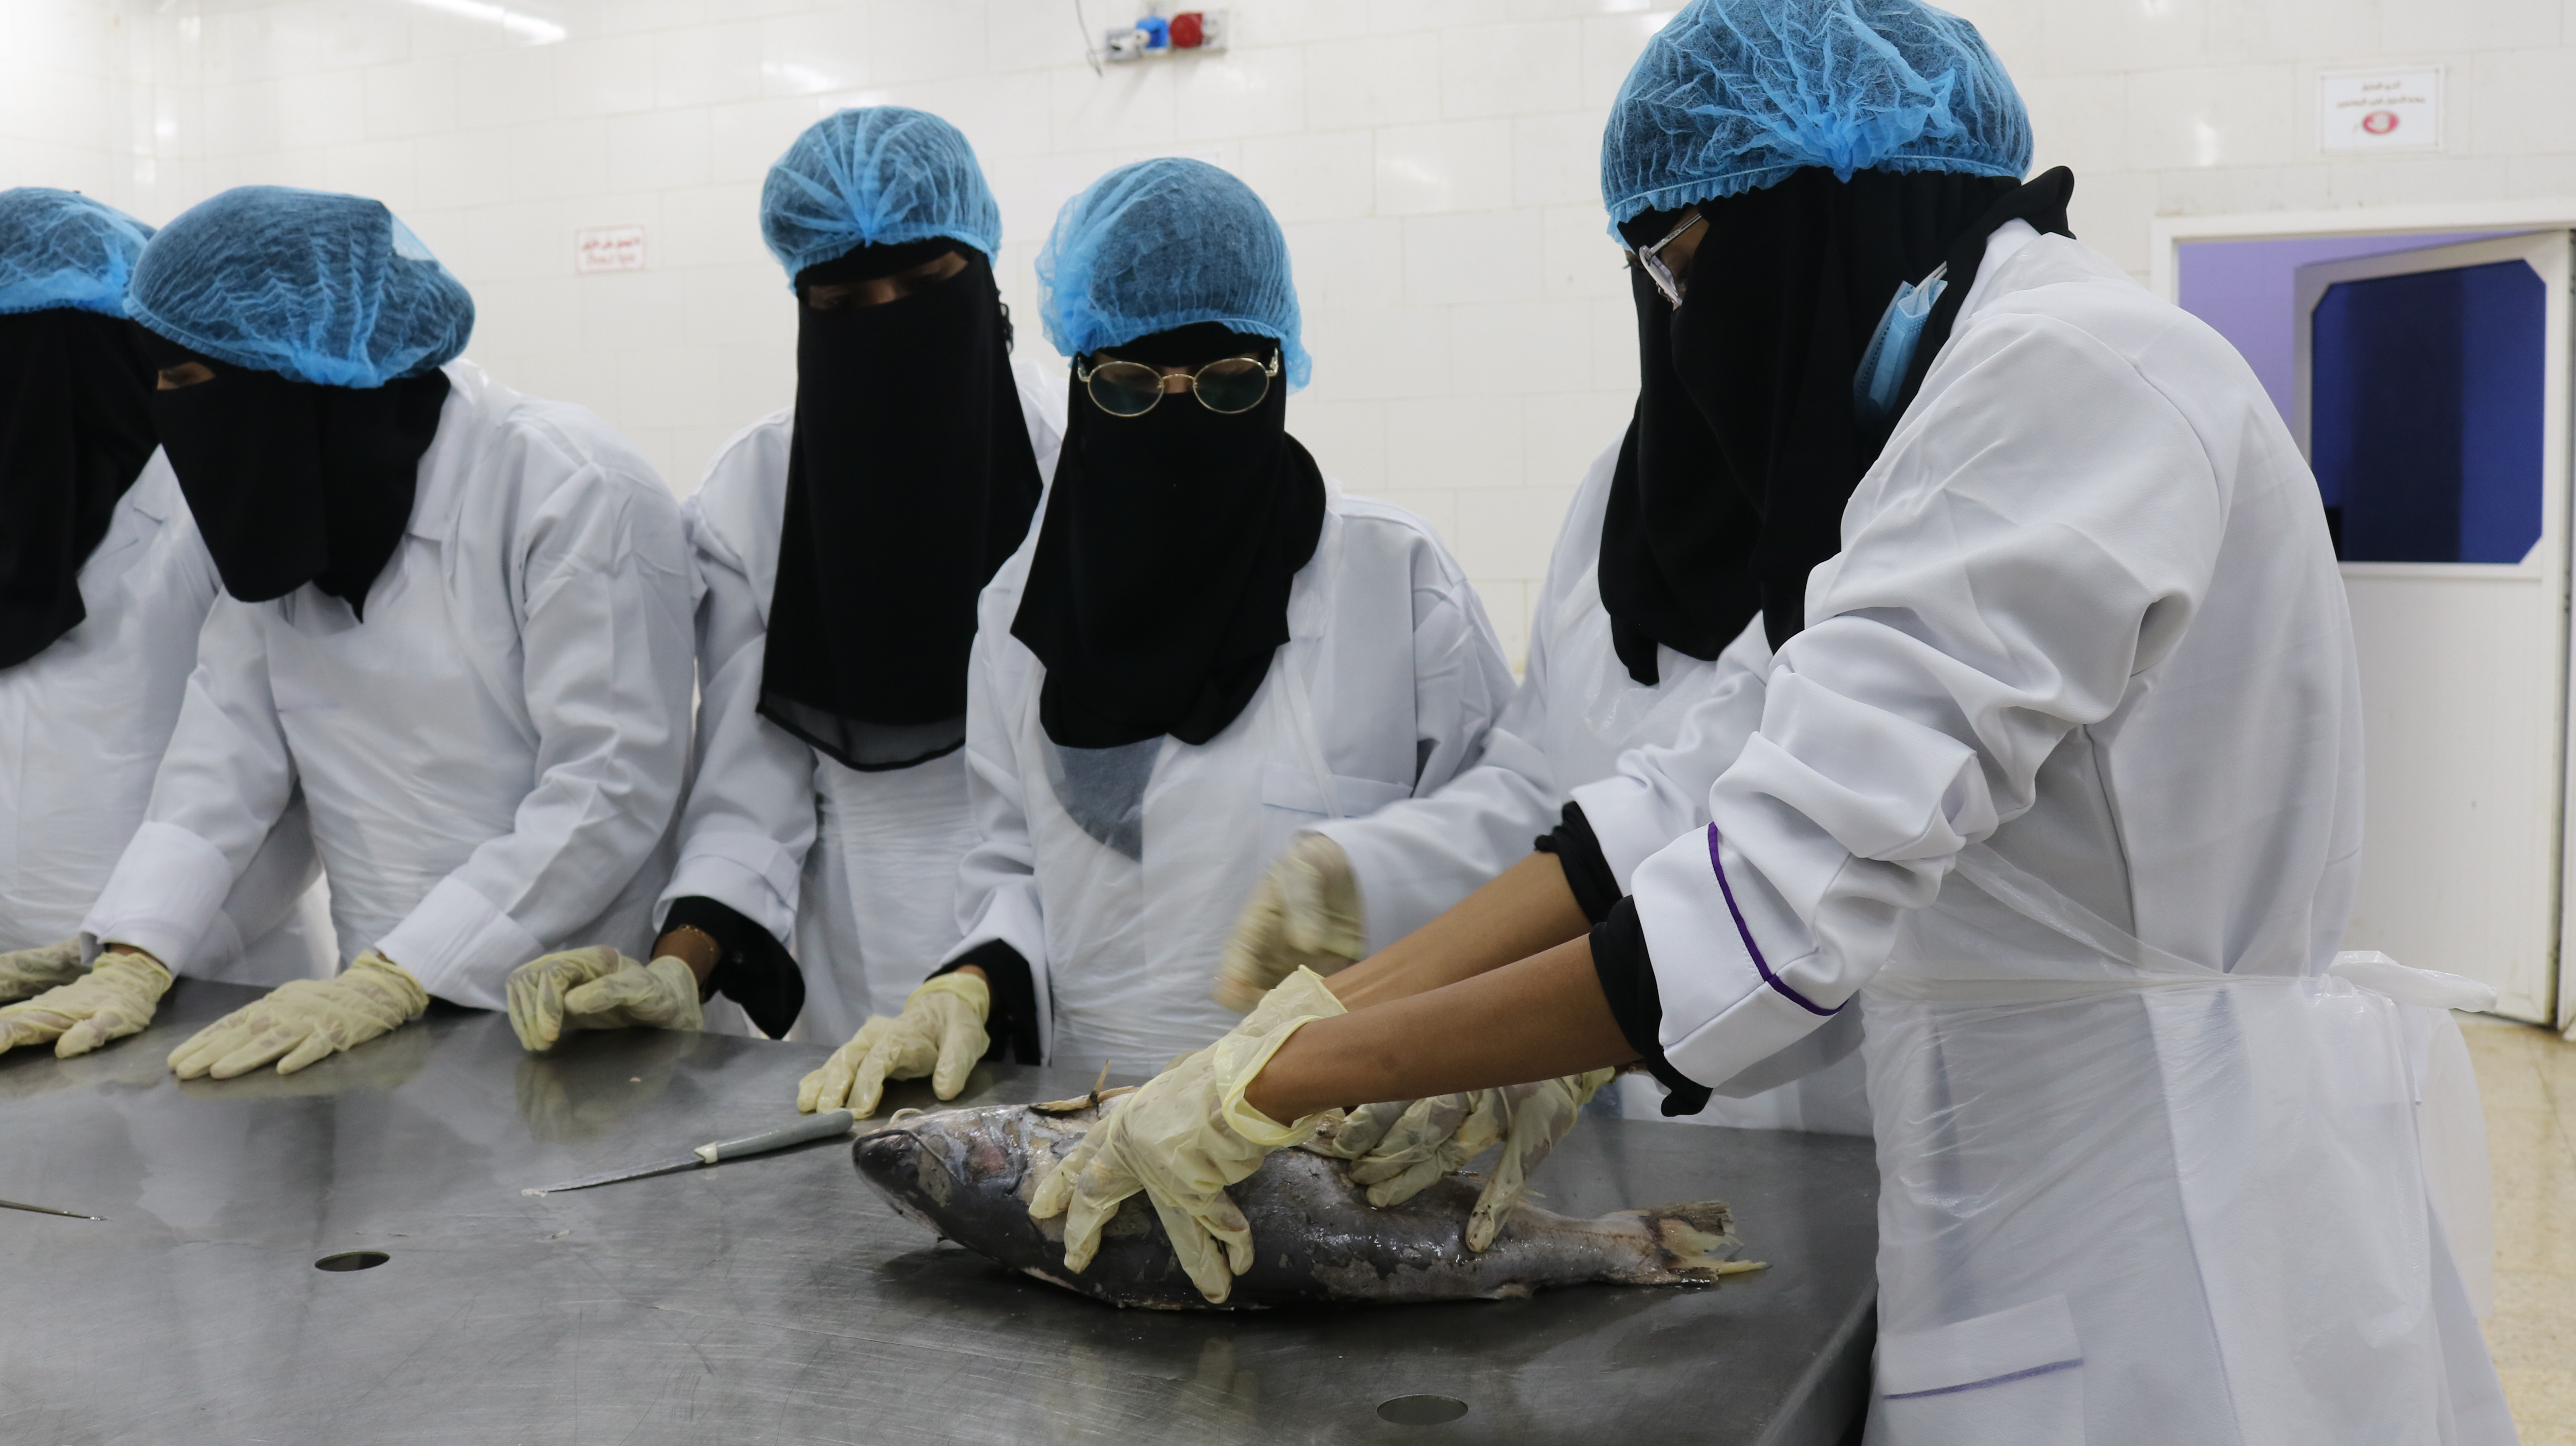 Women in smocks practise processing a fish together.